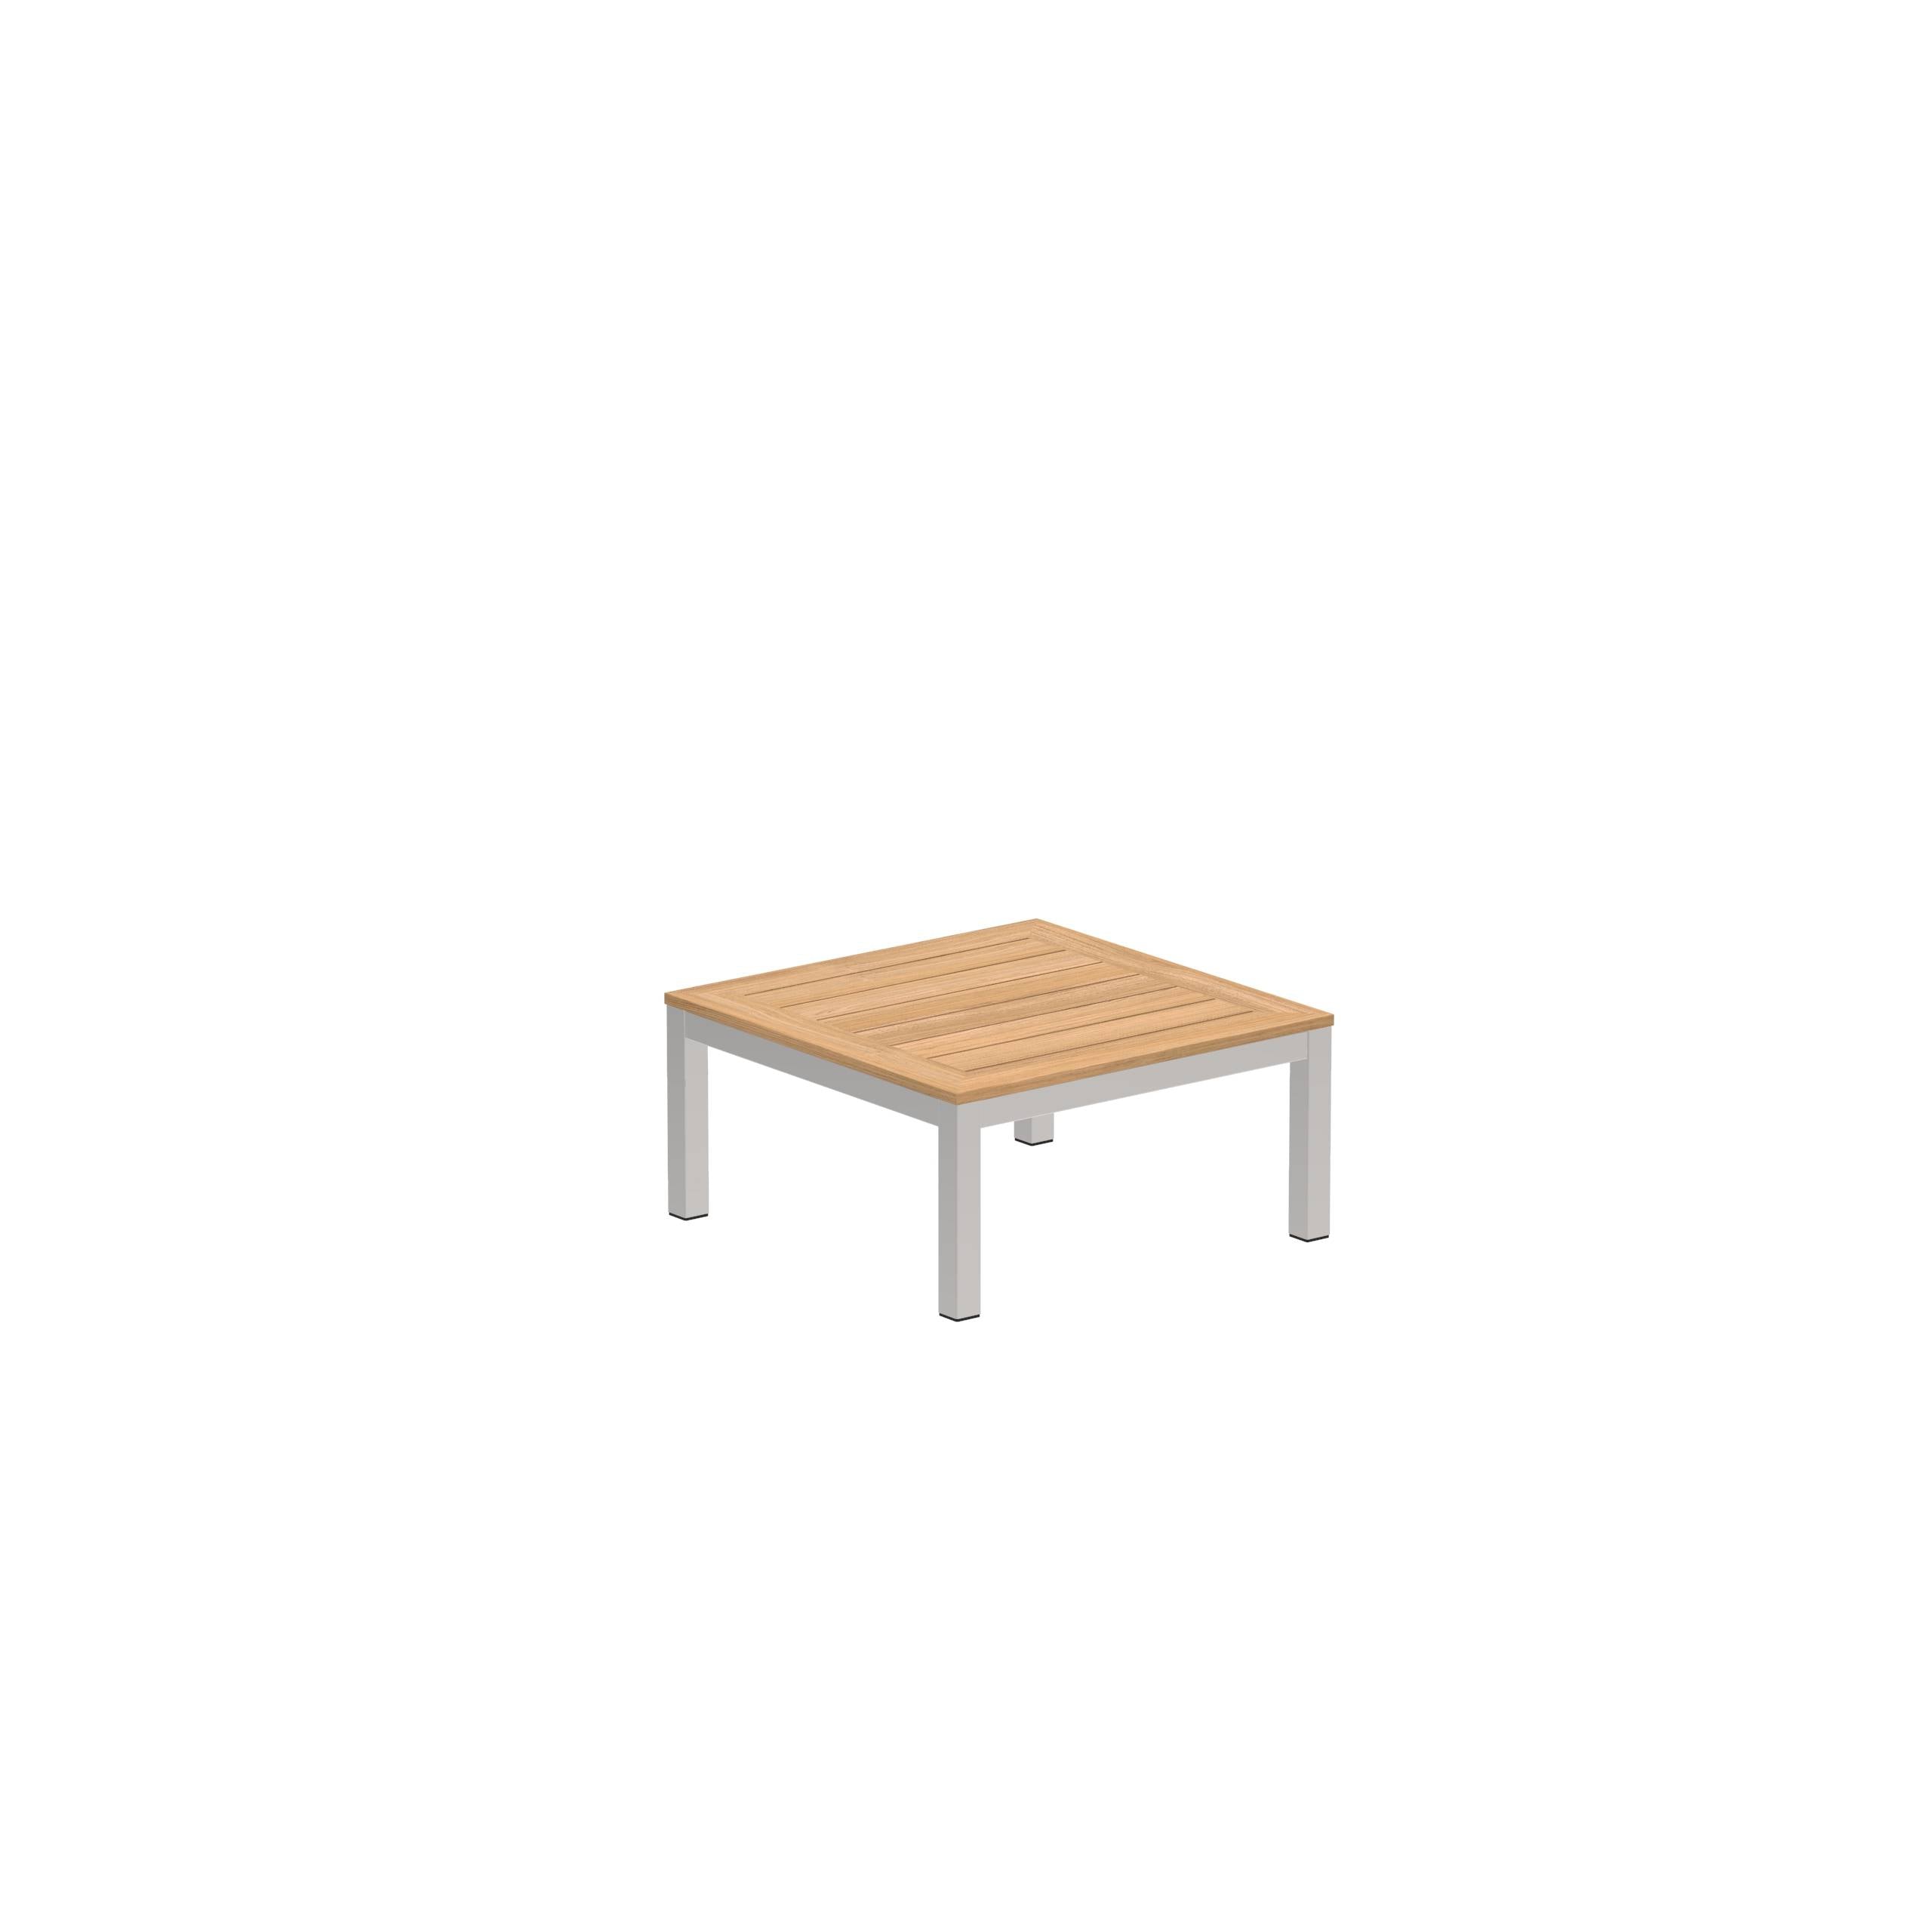 Taboela Low Table 80x80cm Ep With Teak Tabletop